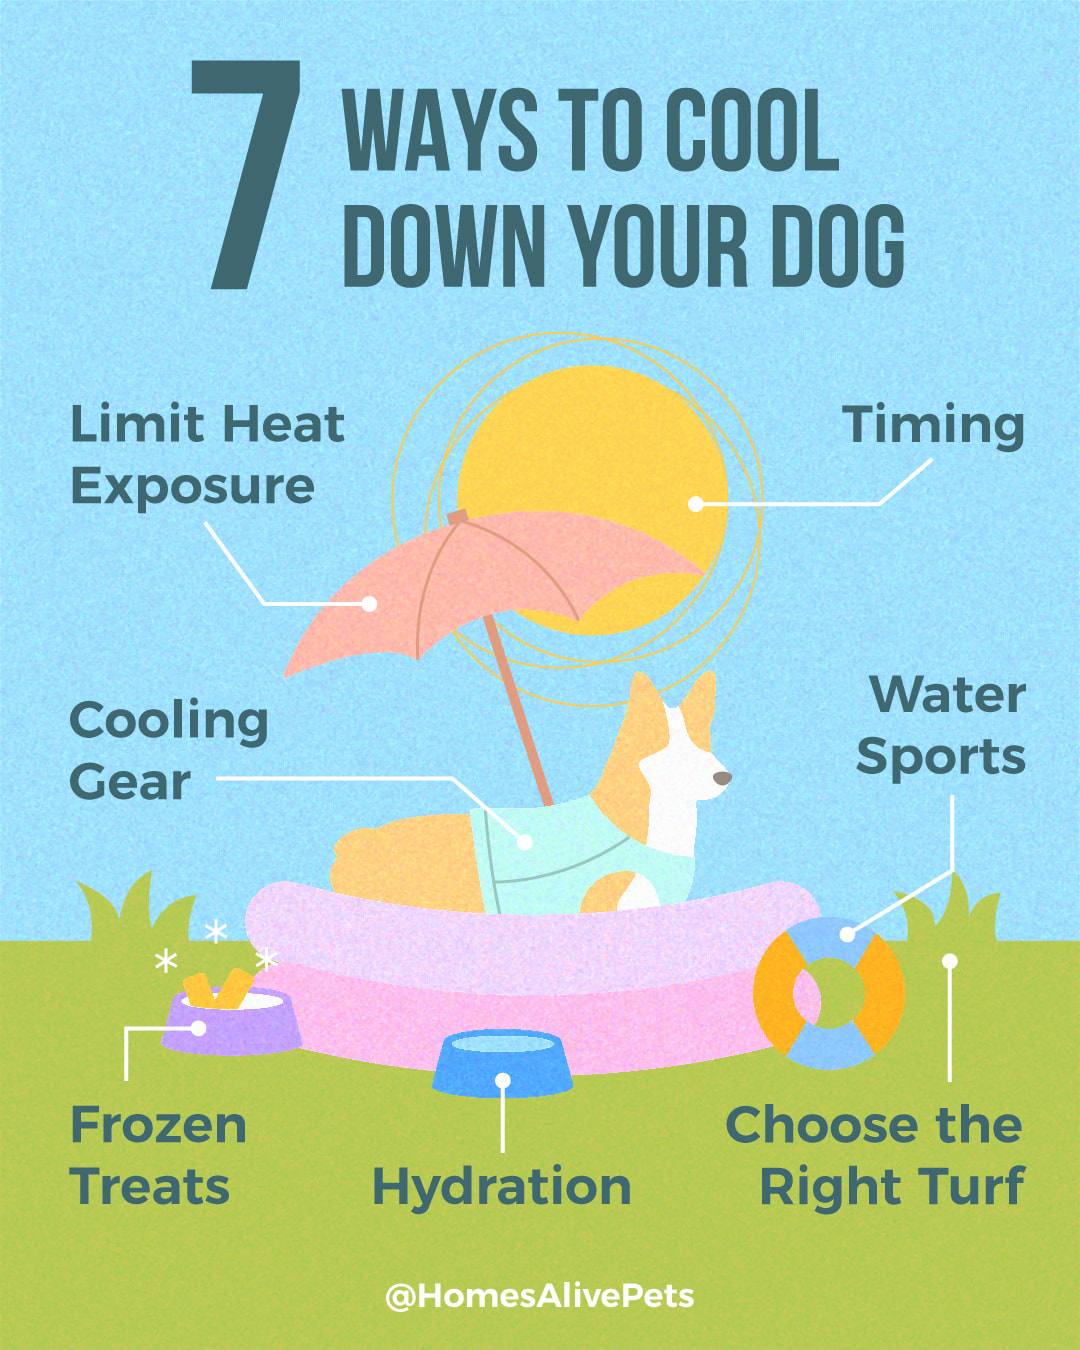 Tips for Keeping Your Dog Cool